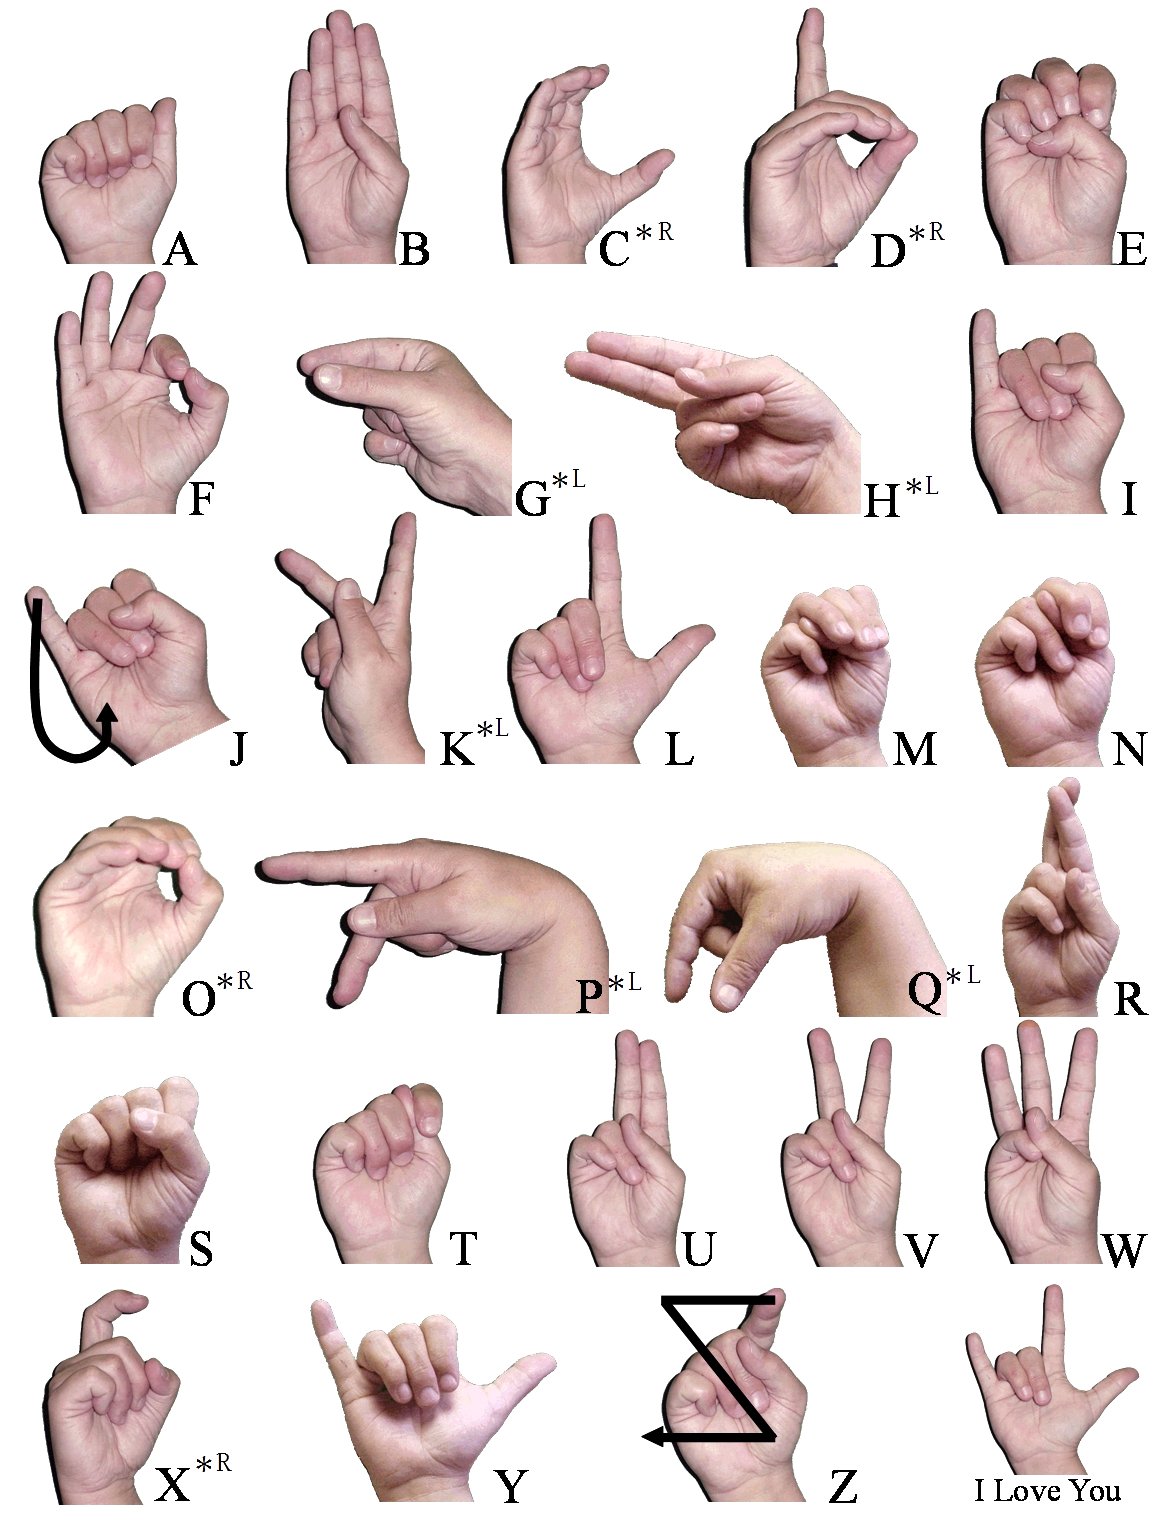 ABC of American Sign Language image from Wikipedia